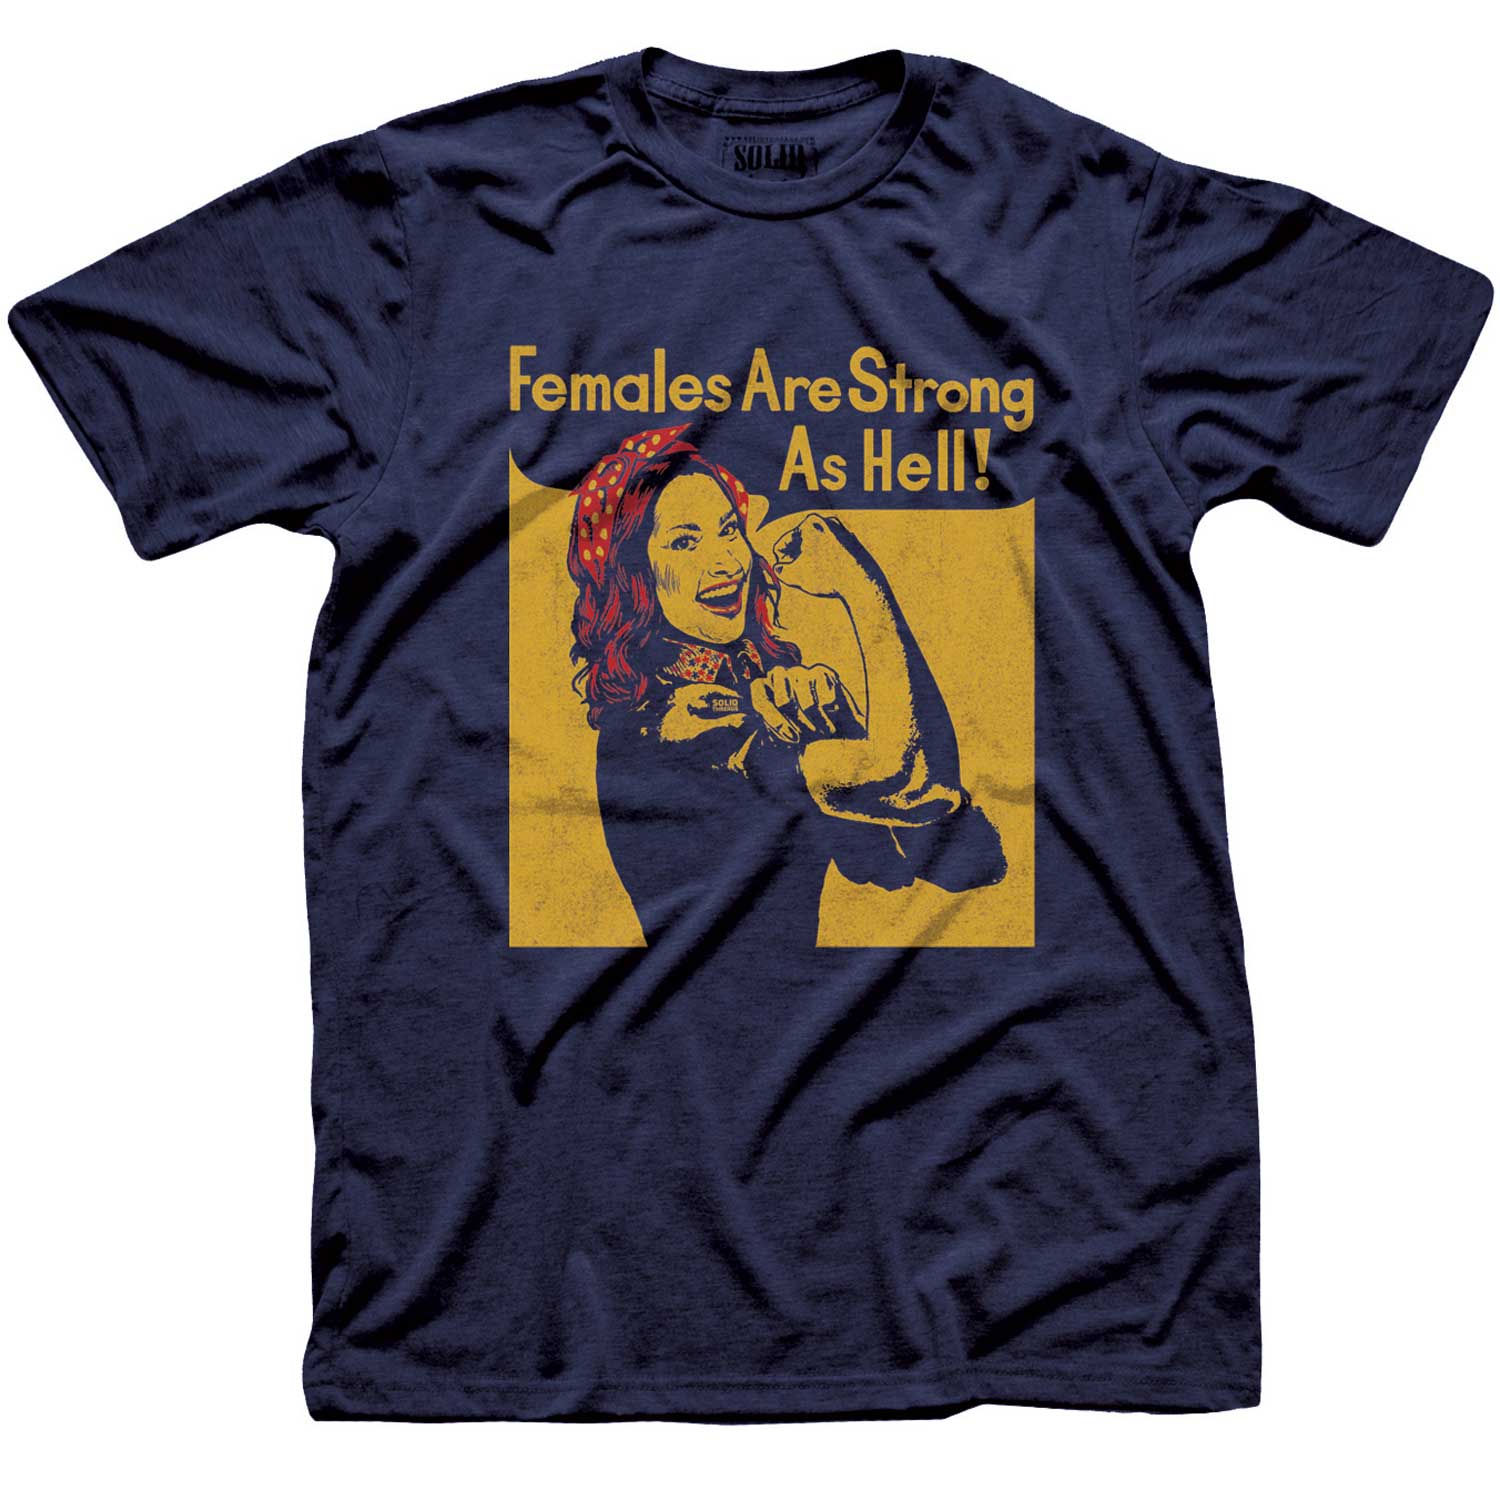 Men's Females Are Strong As Hell Cool Graphic T-Shirt | Vintage Kimmy Schmidt Tee | Solid Threads